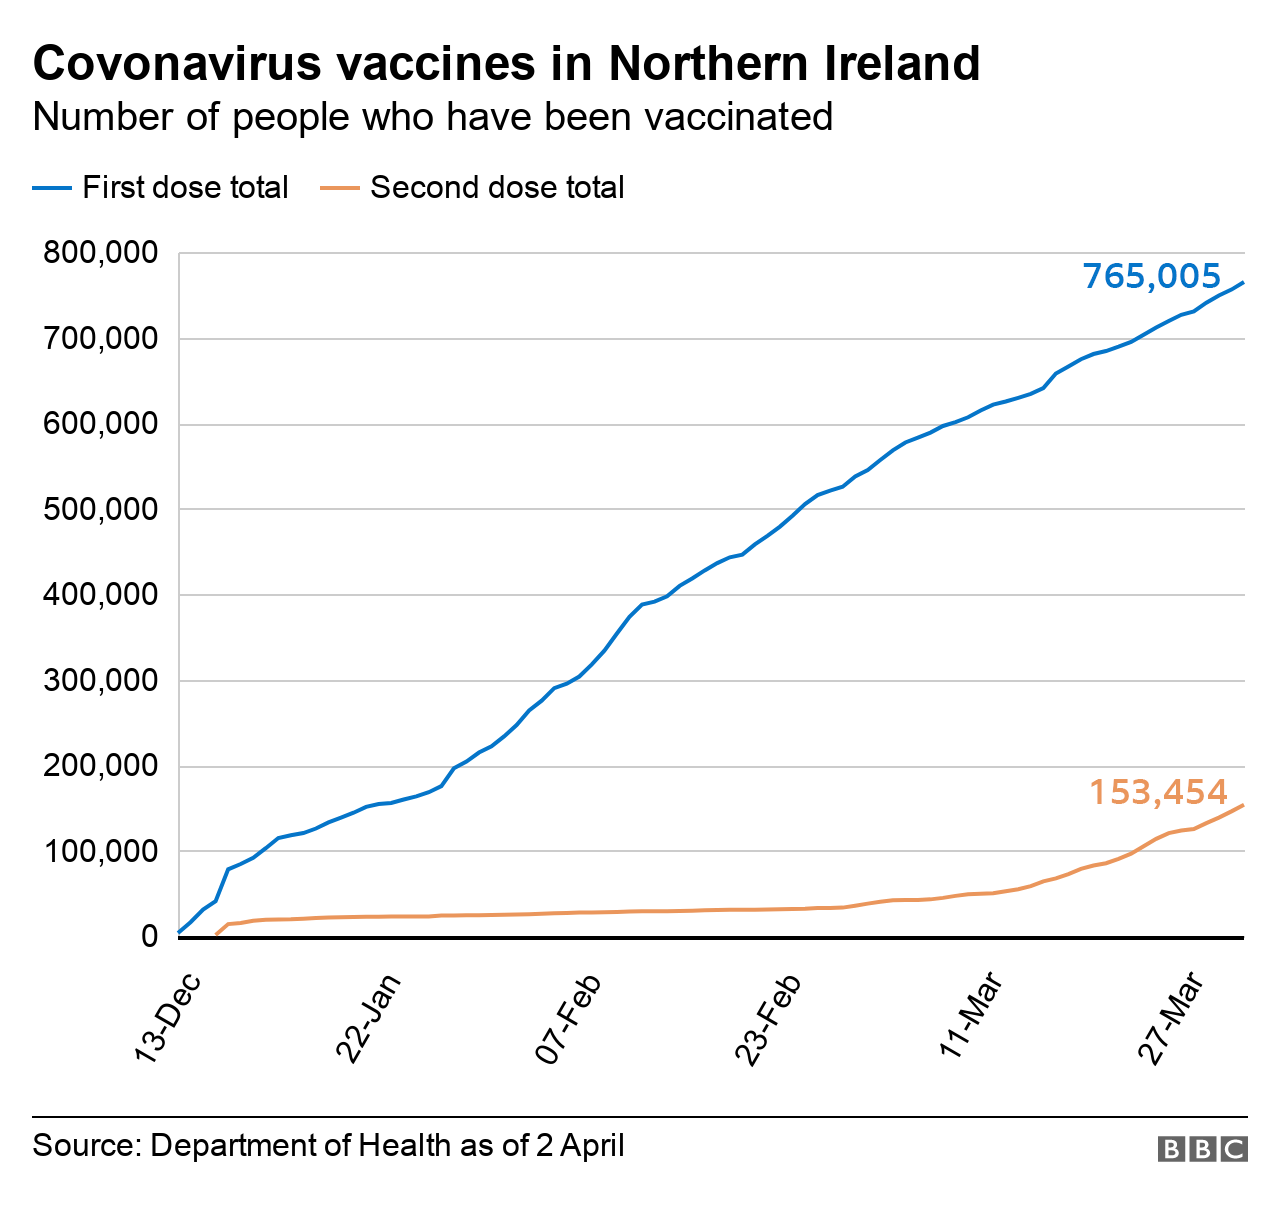 Overall vaccine numbers